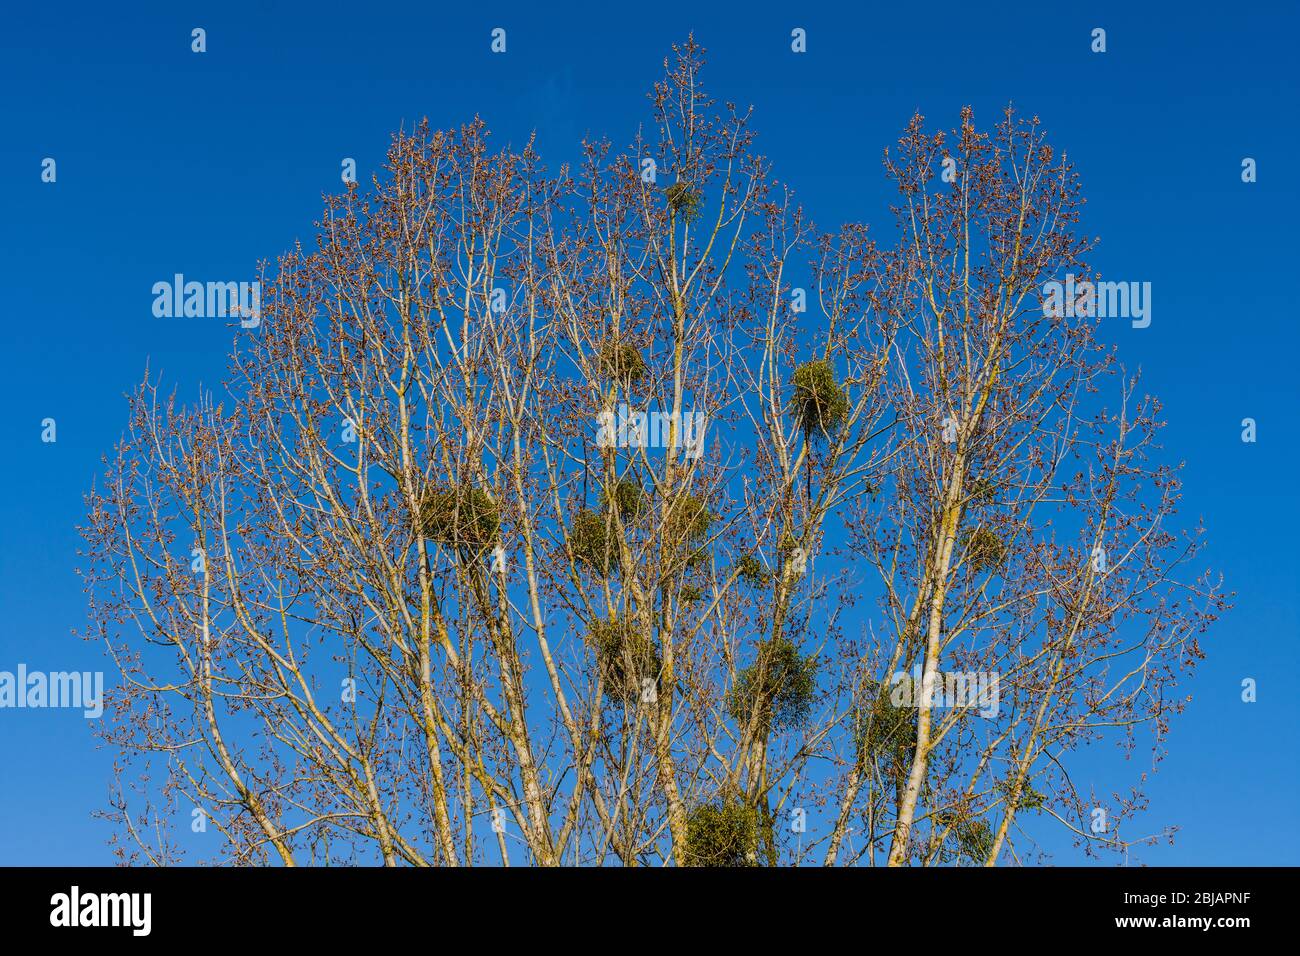 Bunches of Mistletoe in Elm tree before leafing. Stock Photo